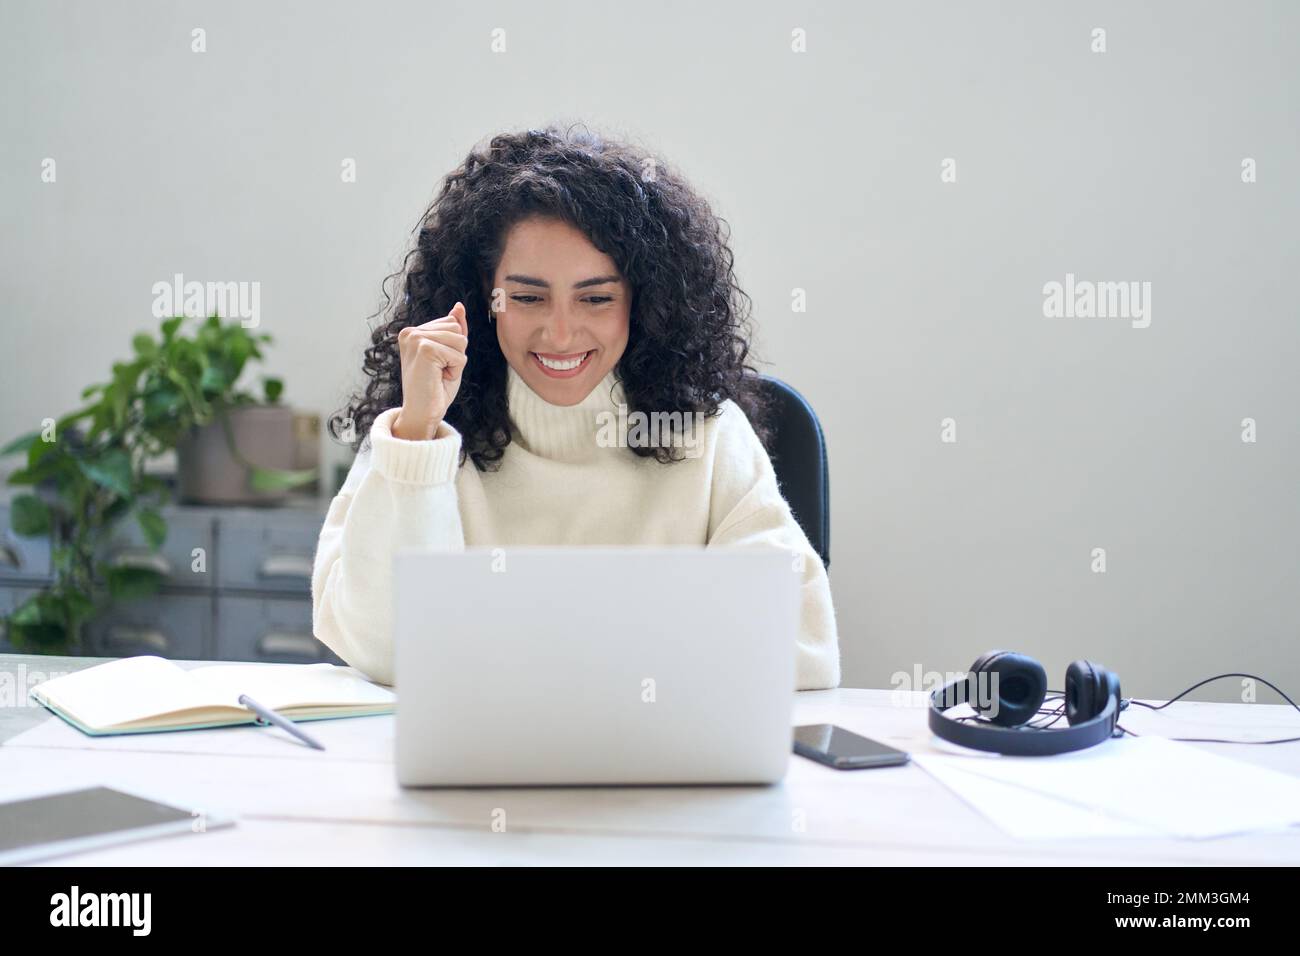 Happy young woman student or employee using laptop feeling excited. Stock Photo